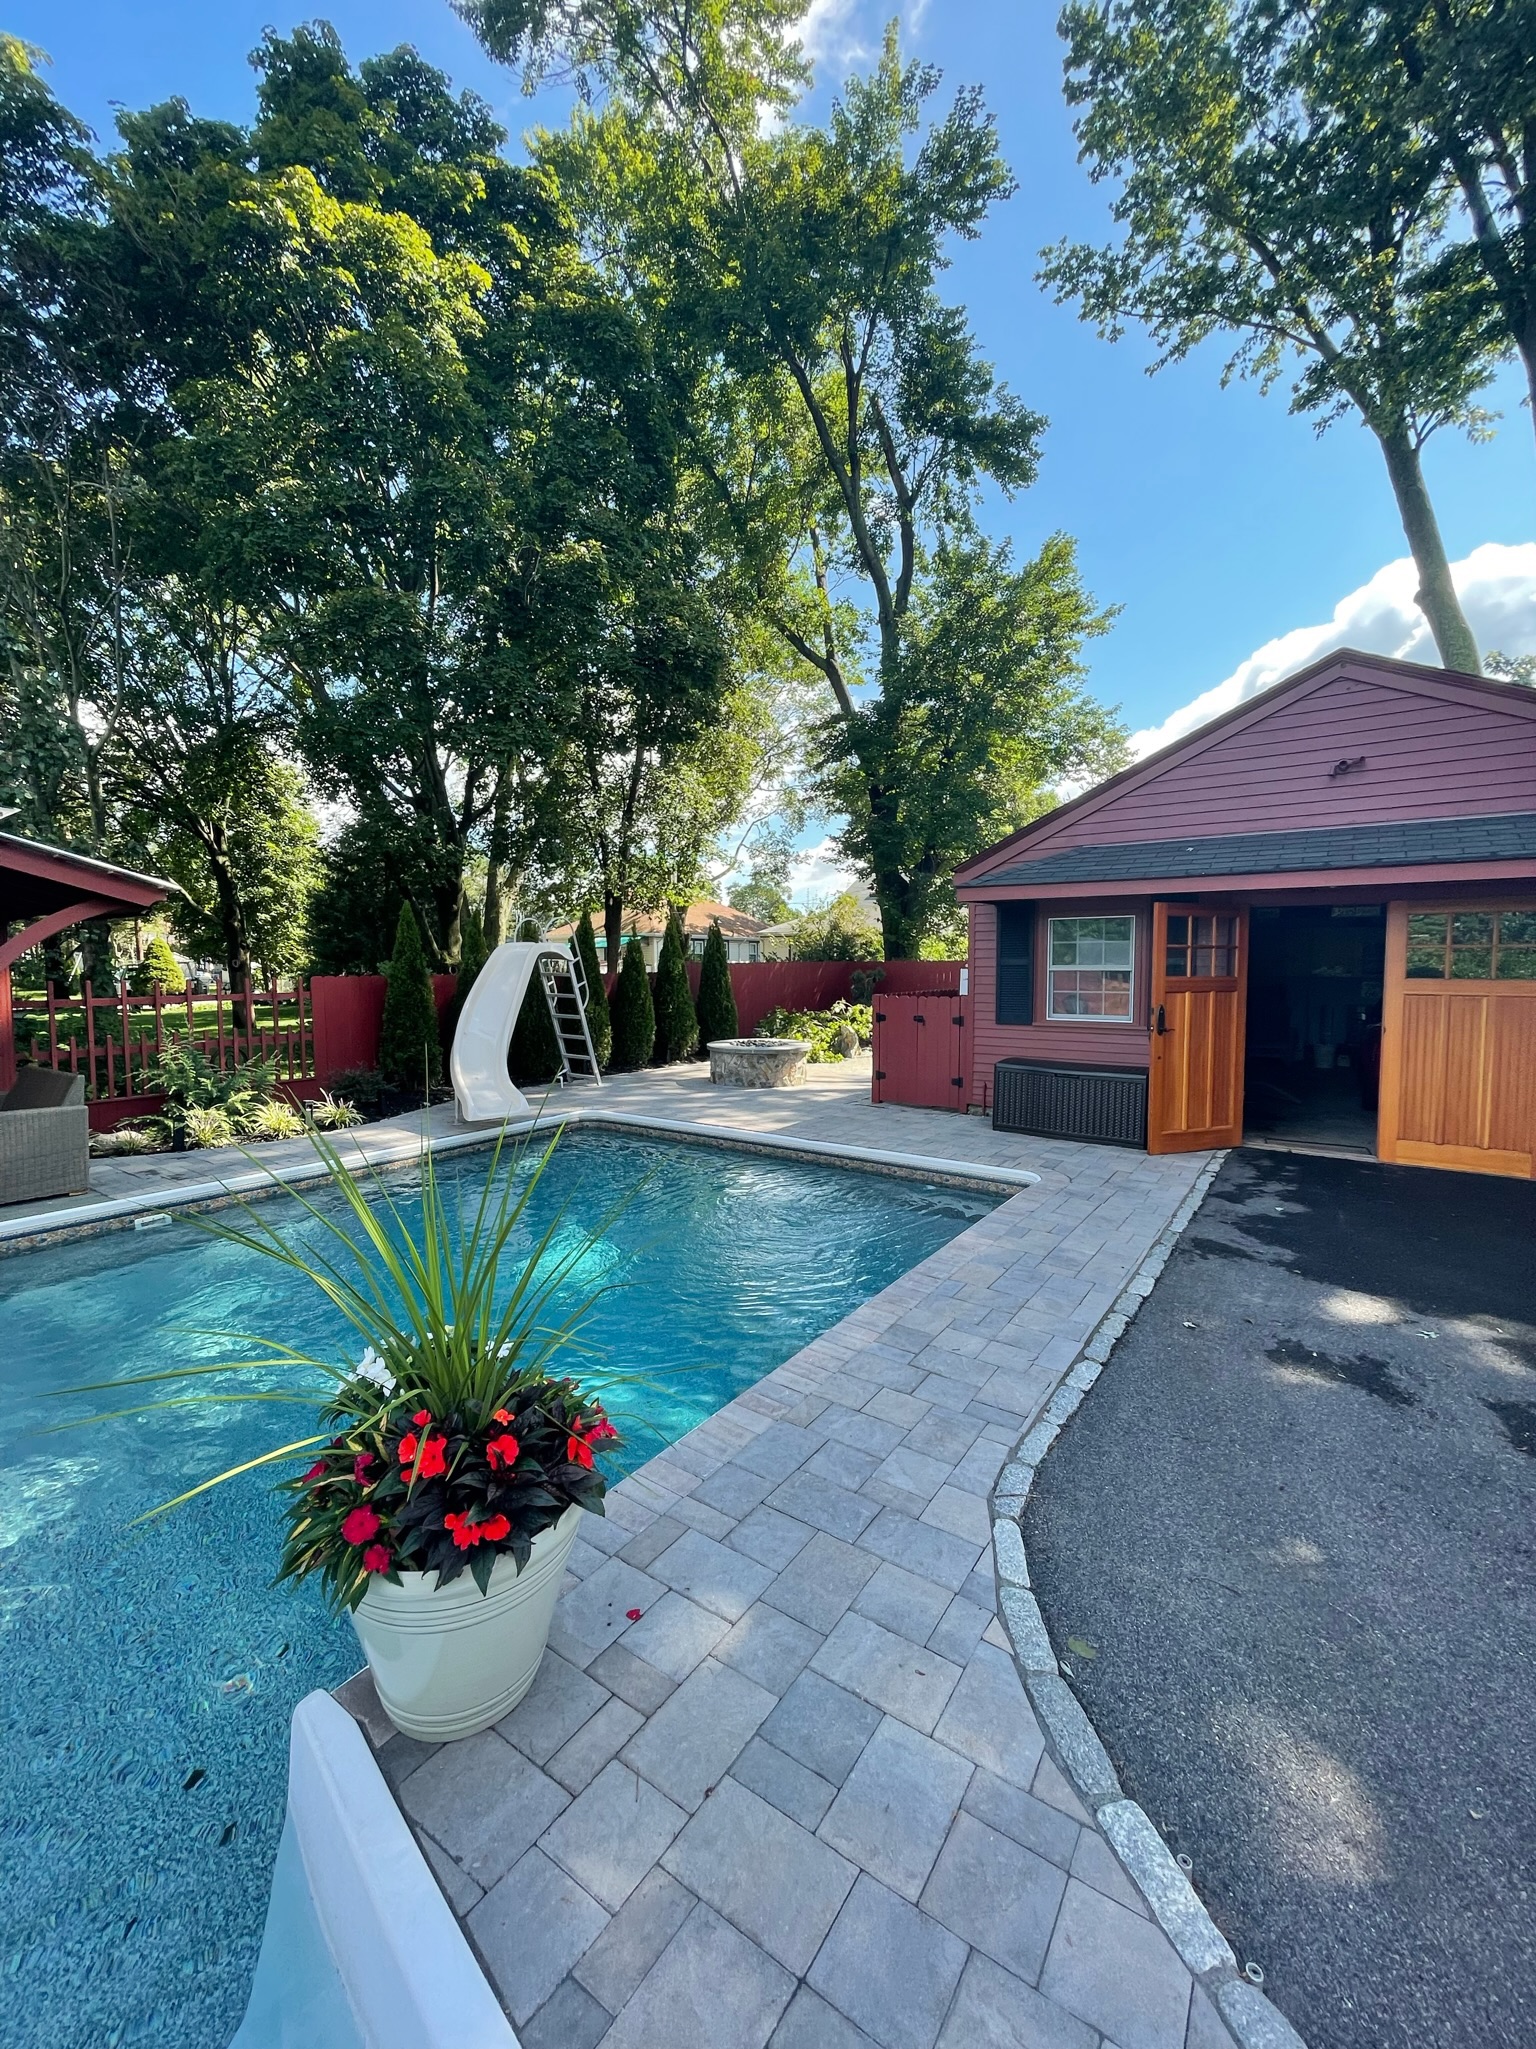 House and pool with stone paver walkway